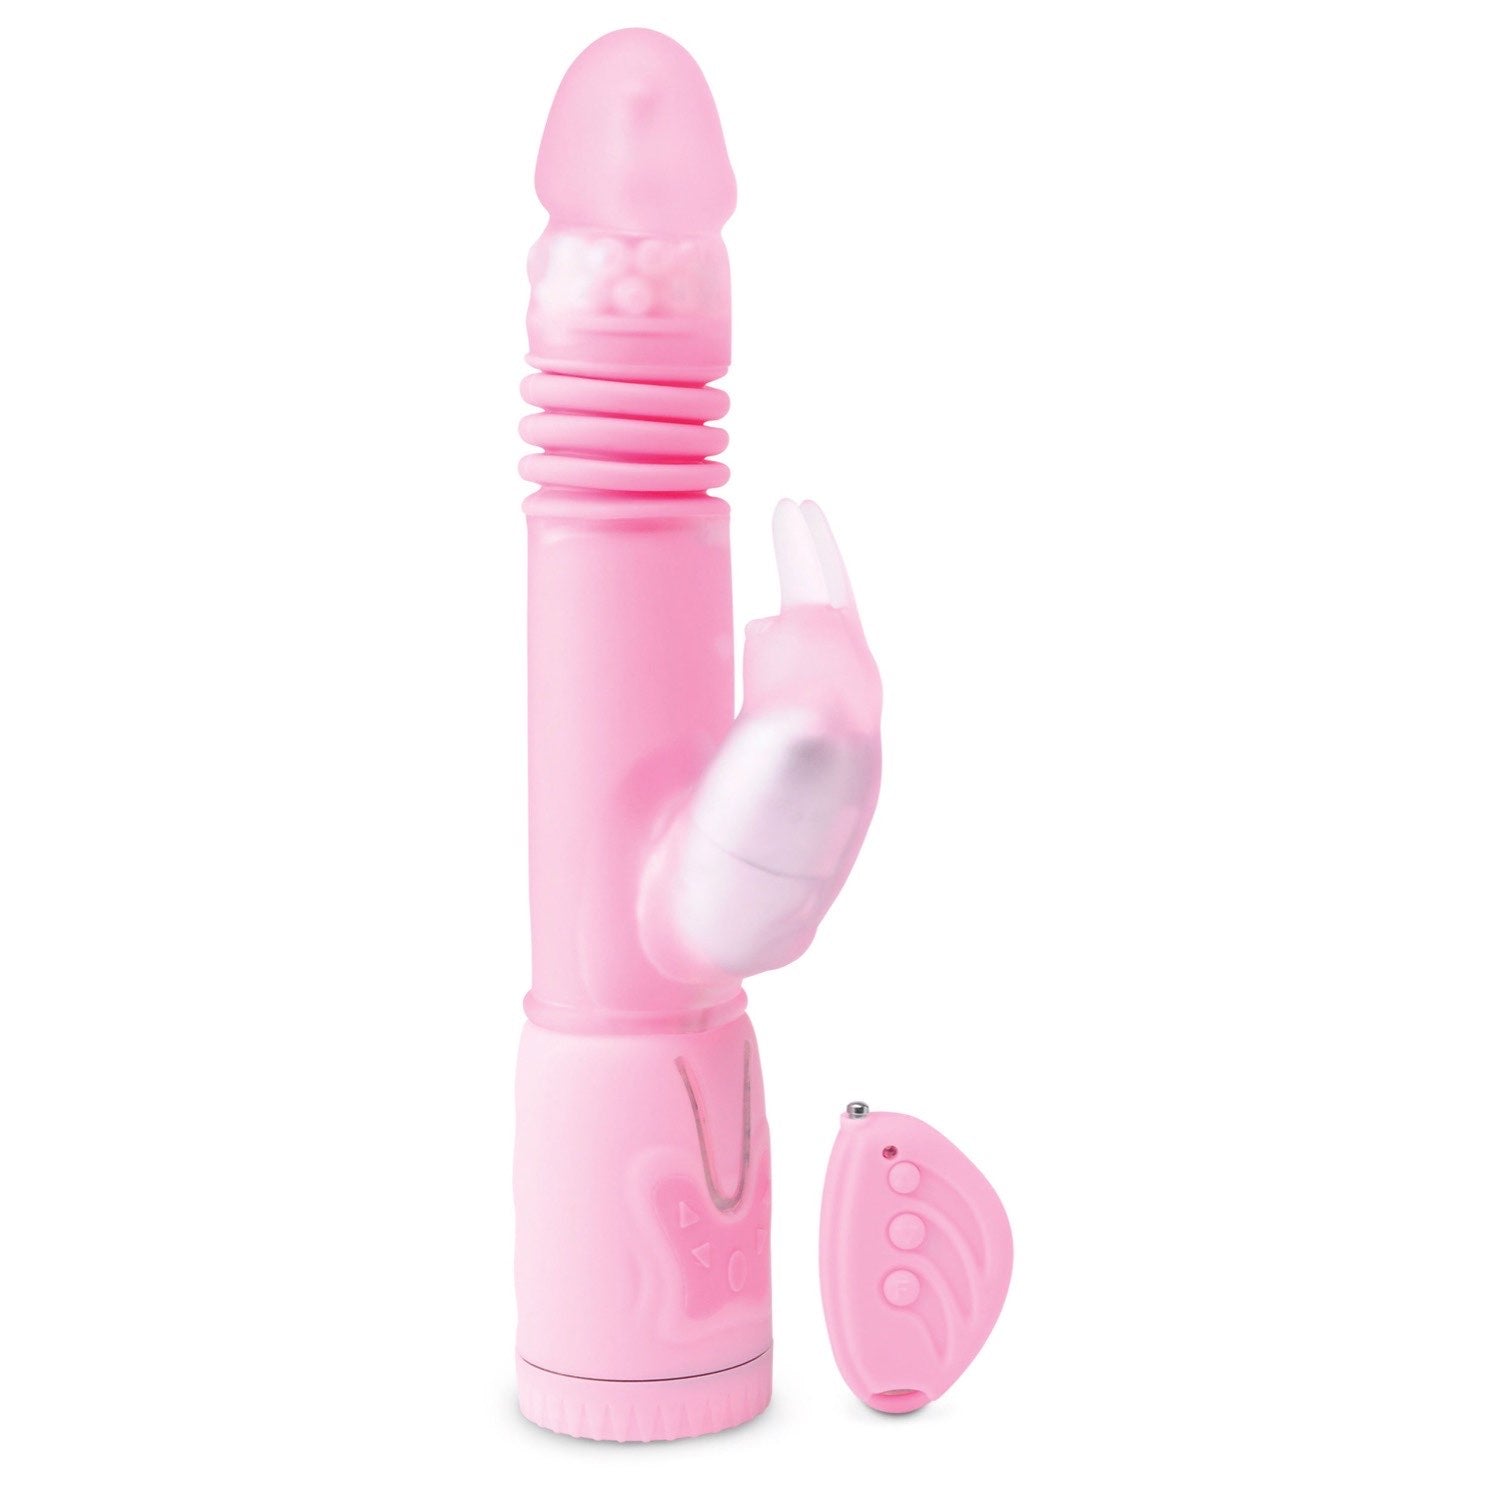  Remote Control Thrusting Rabbit Pearl - Pink 10.25&quot; Pearl Vibrator with Rabbit Clit Stimulator by Pipedream